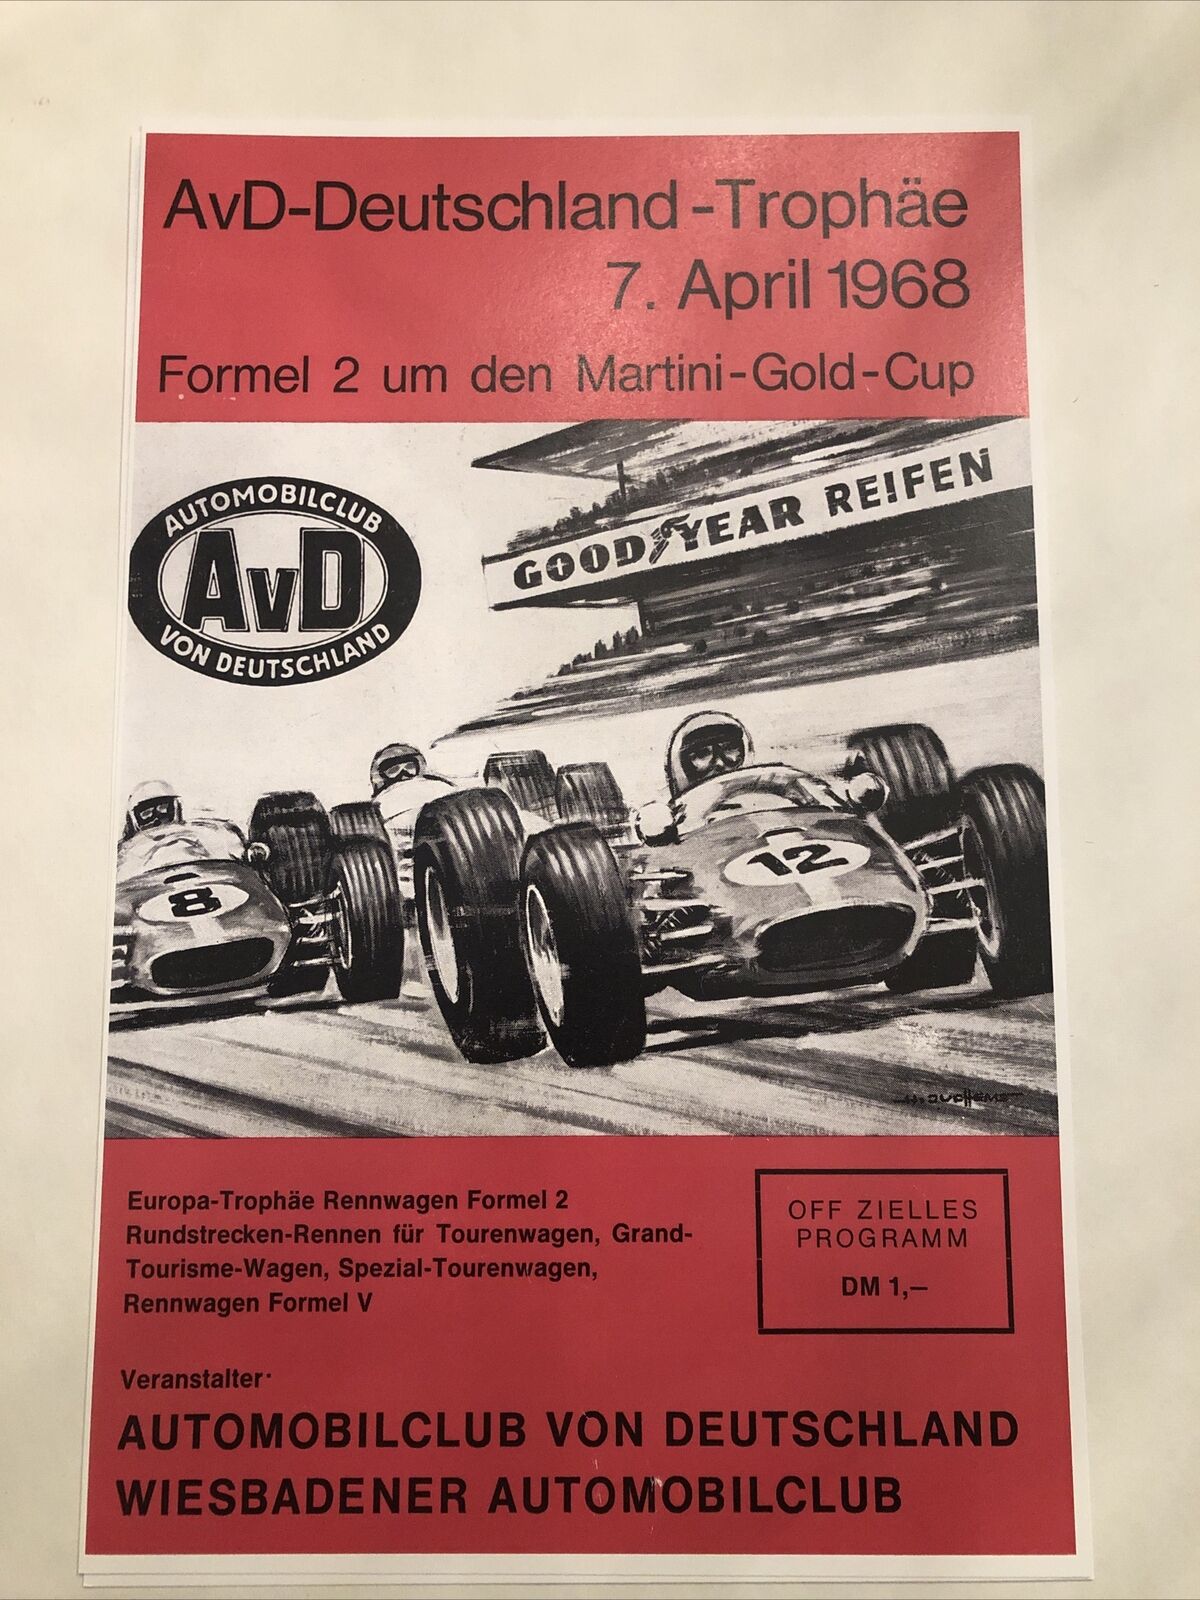 AWESOME AvD -DEUTSCHLAND -TROPHAE APRIL 1968 POSTER